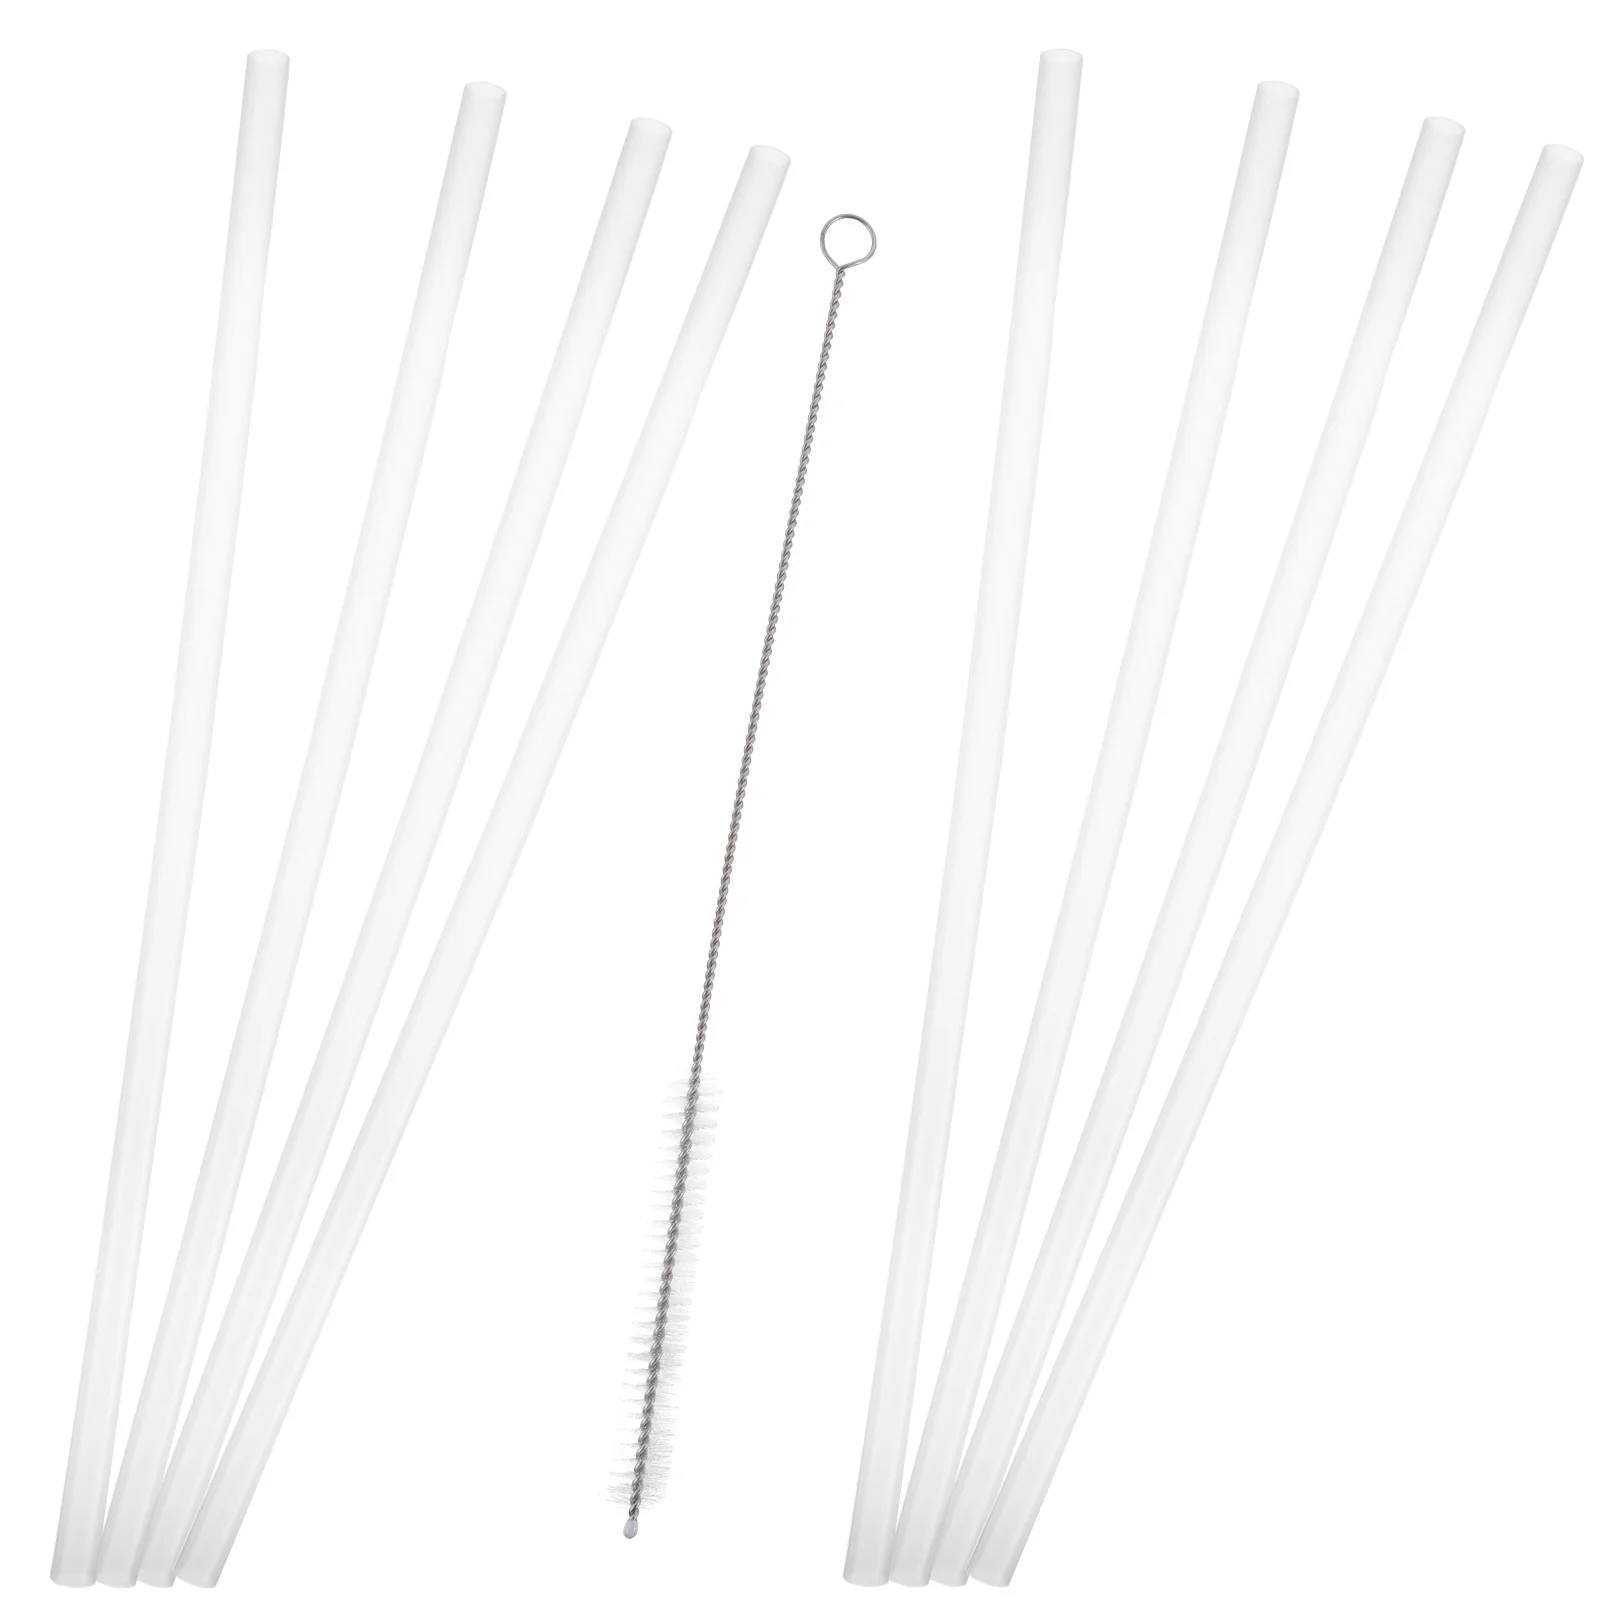 

1 Set of Reusable Straws Curved Straws Beverage Straws Drink Straws with Brush